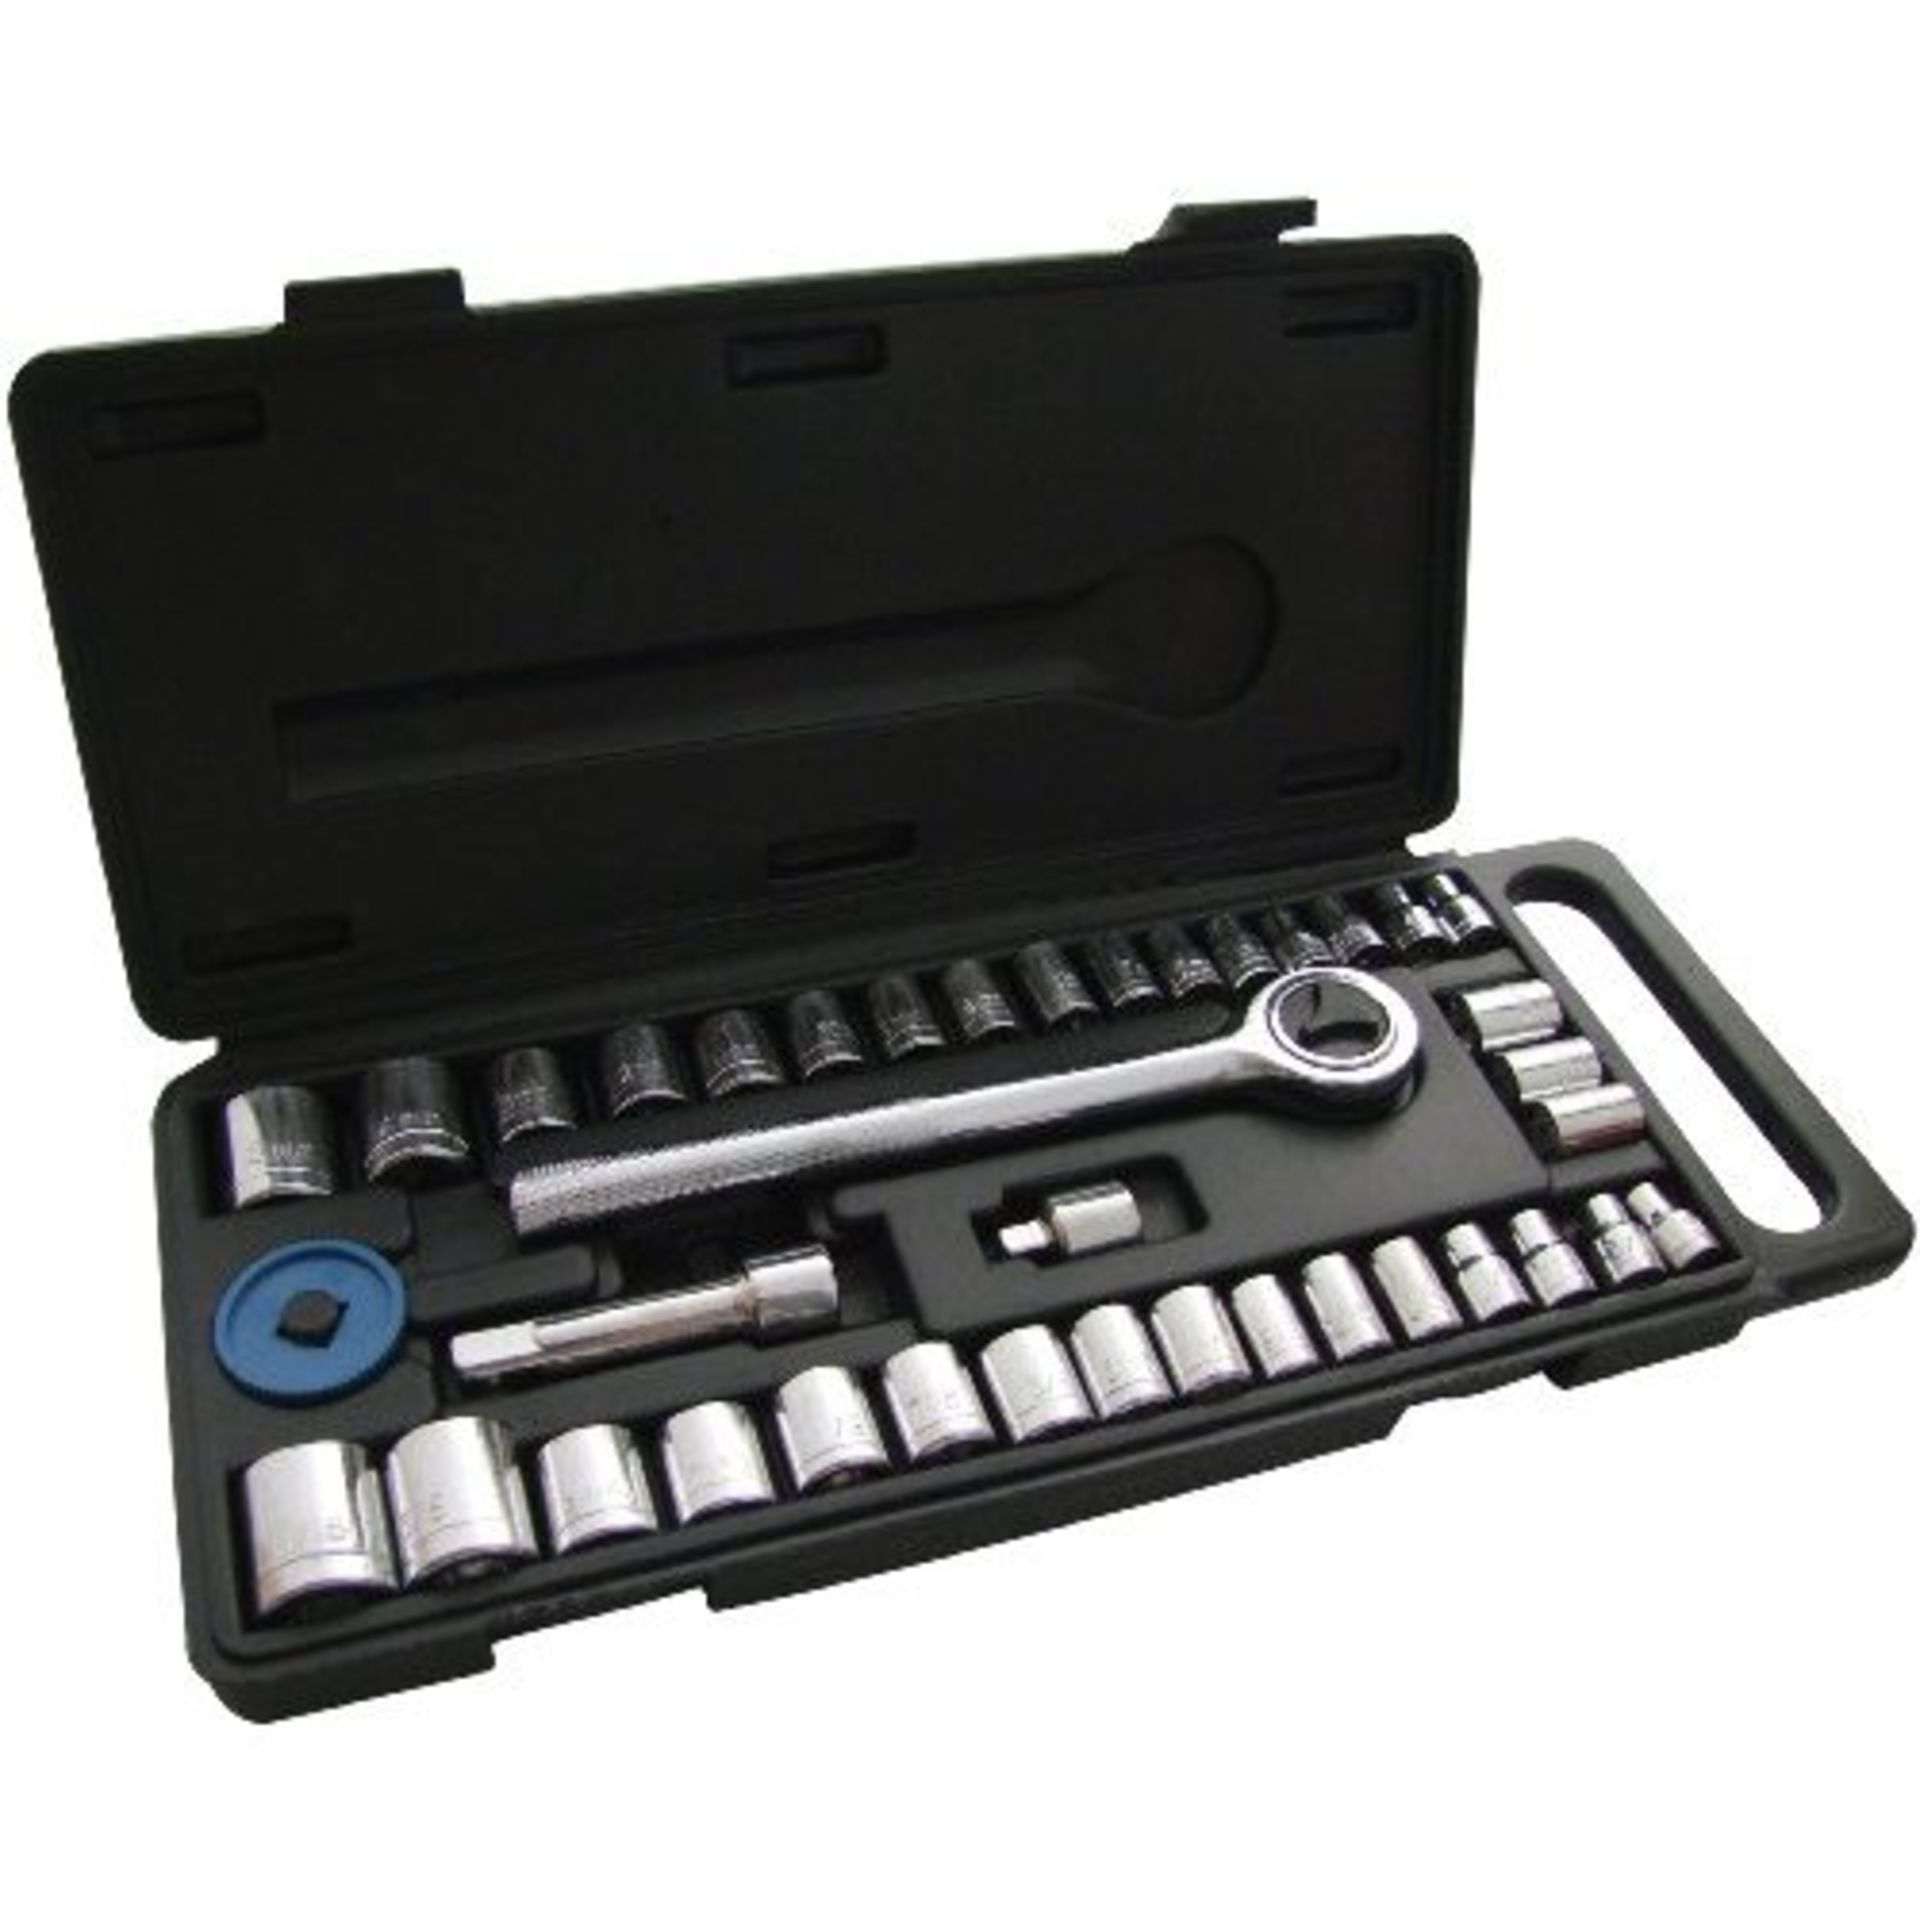 V Brand New 40 Piece Socket Set X 2 Bid price to be multiplied by Two